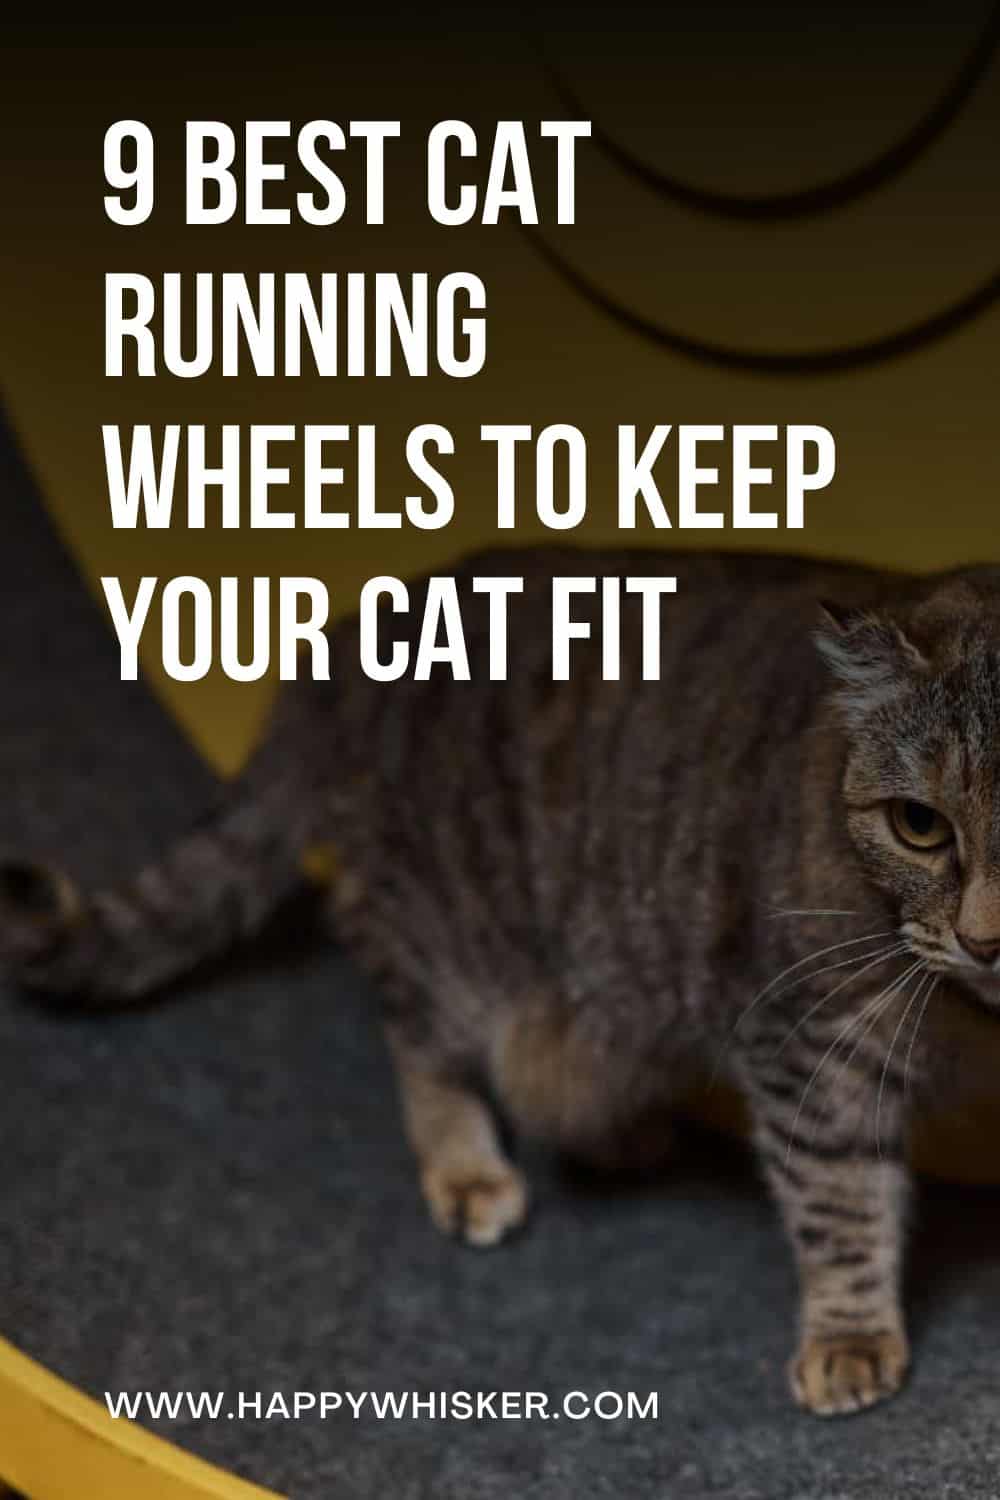 9 Best Cat Running Wheels To Keep Your Cat Fit Pinterest